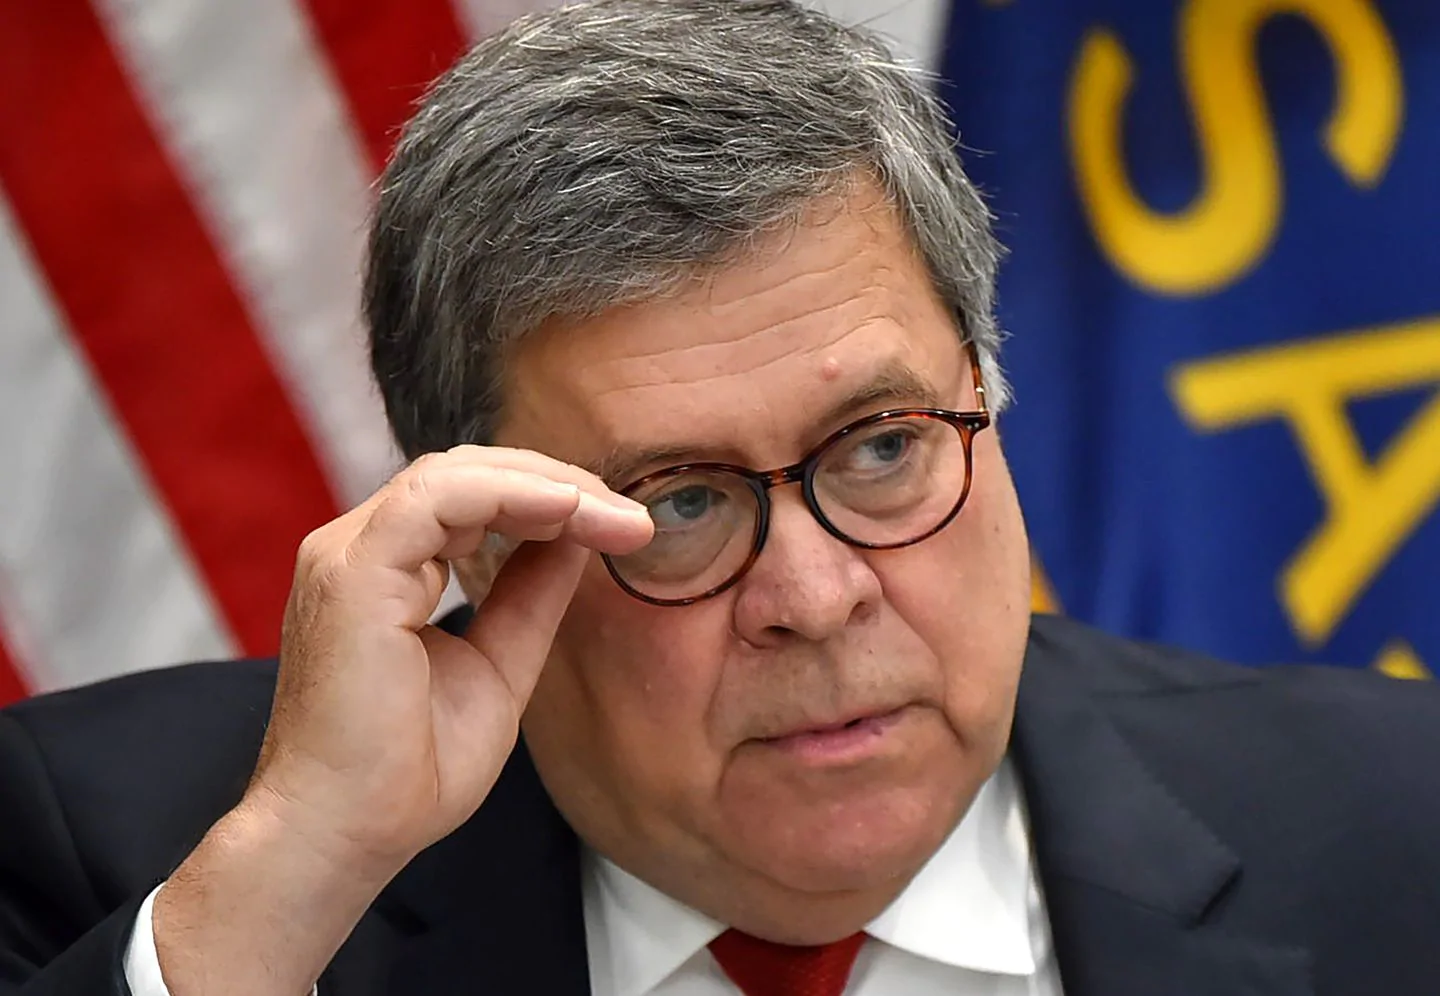 Barr’s review of Russia investigation wins Trump’s favor. Those facing scrutiny suspect he’s chasing conspiracy theories.